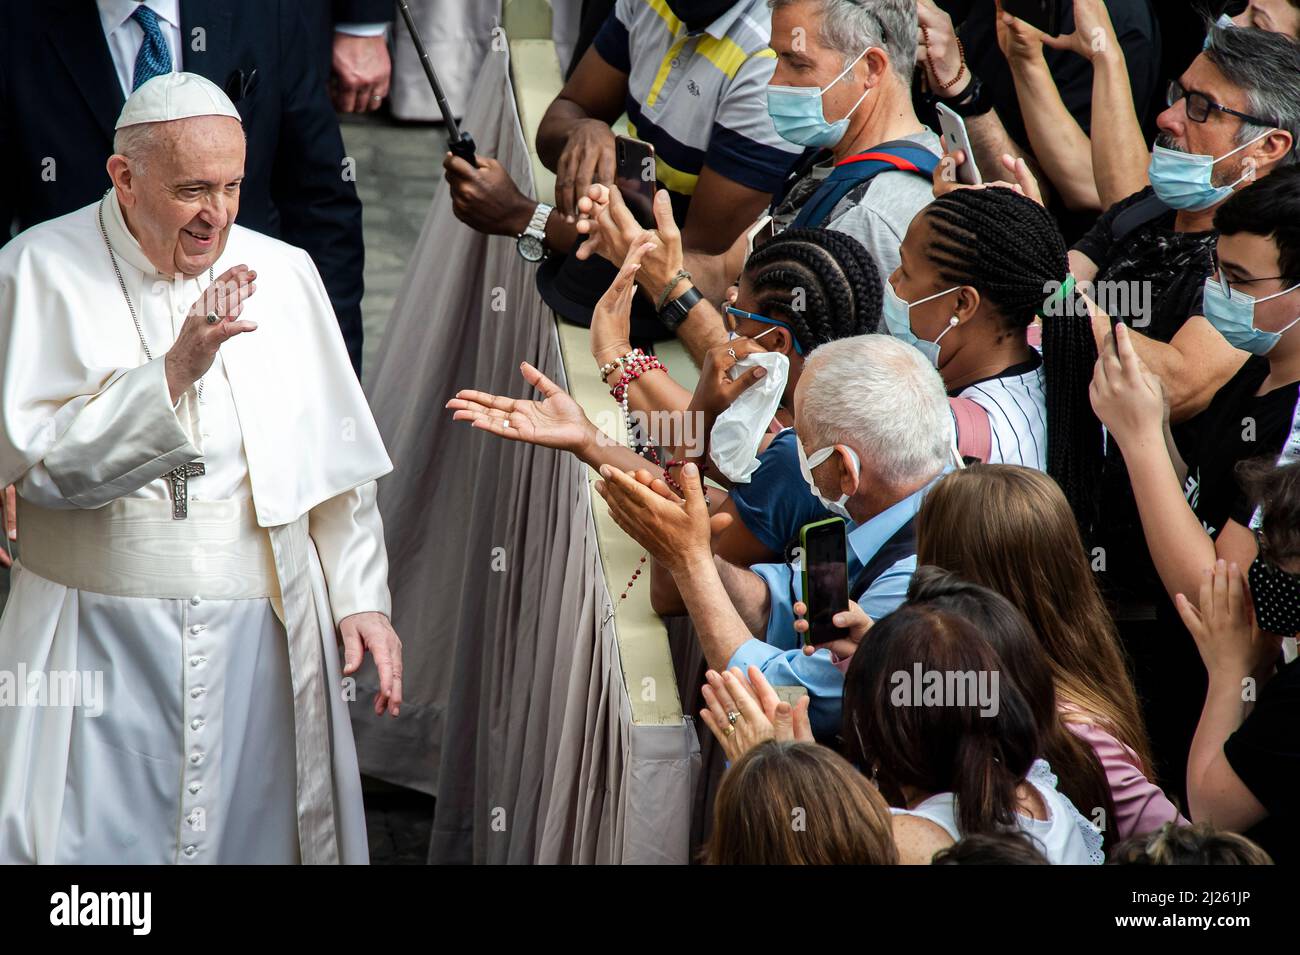 Pope Francis meets faithfuls at the end of a limited public audience at the San Damaso courtyard in The Vatican. Stock Photo